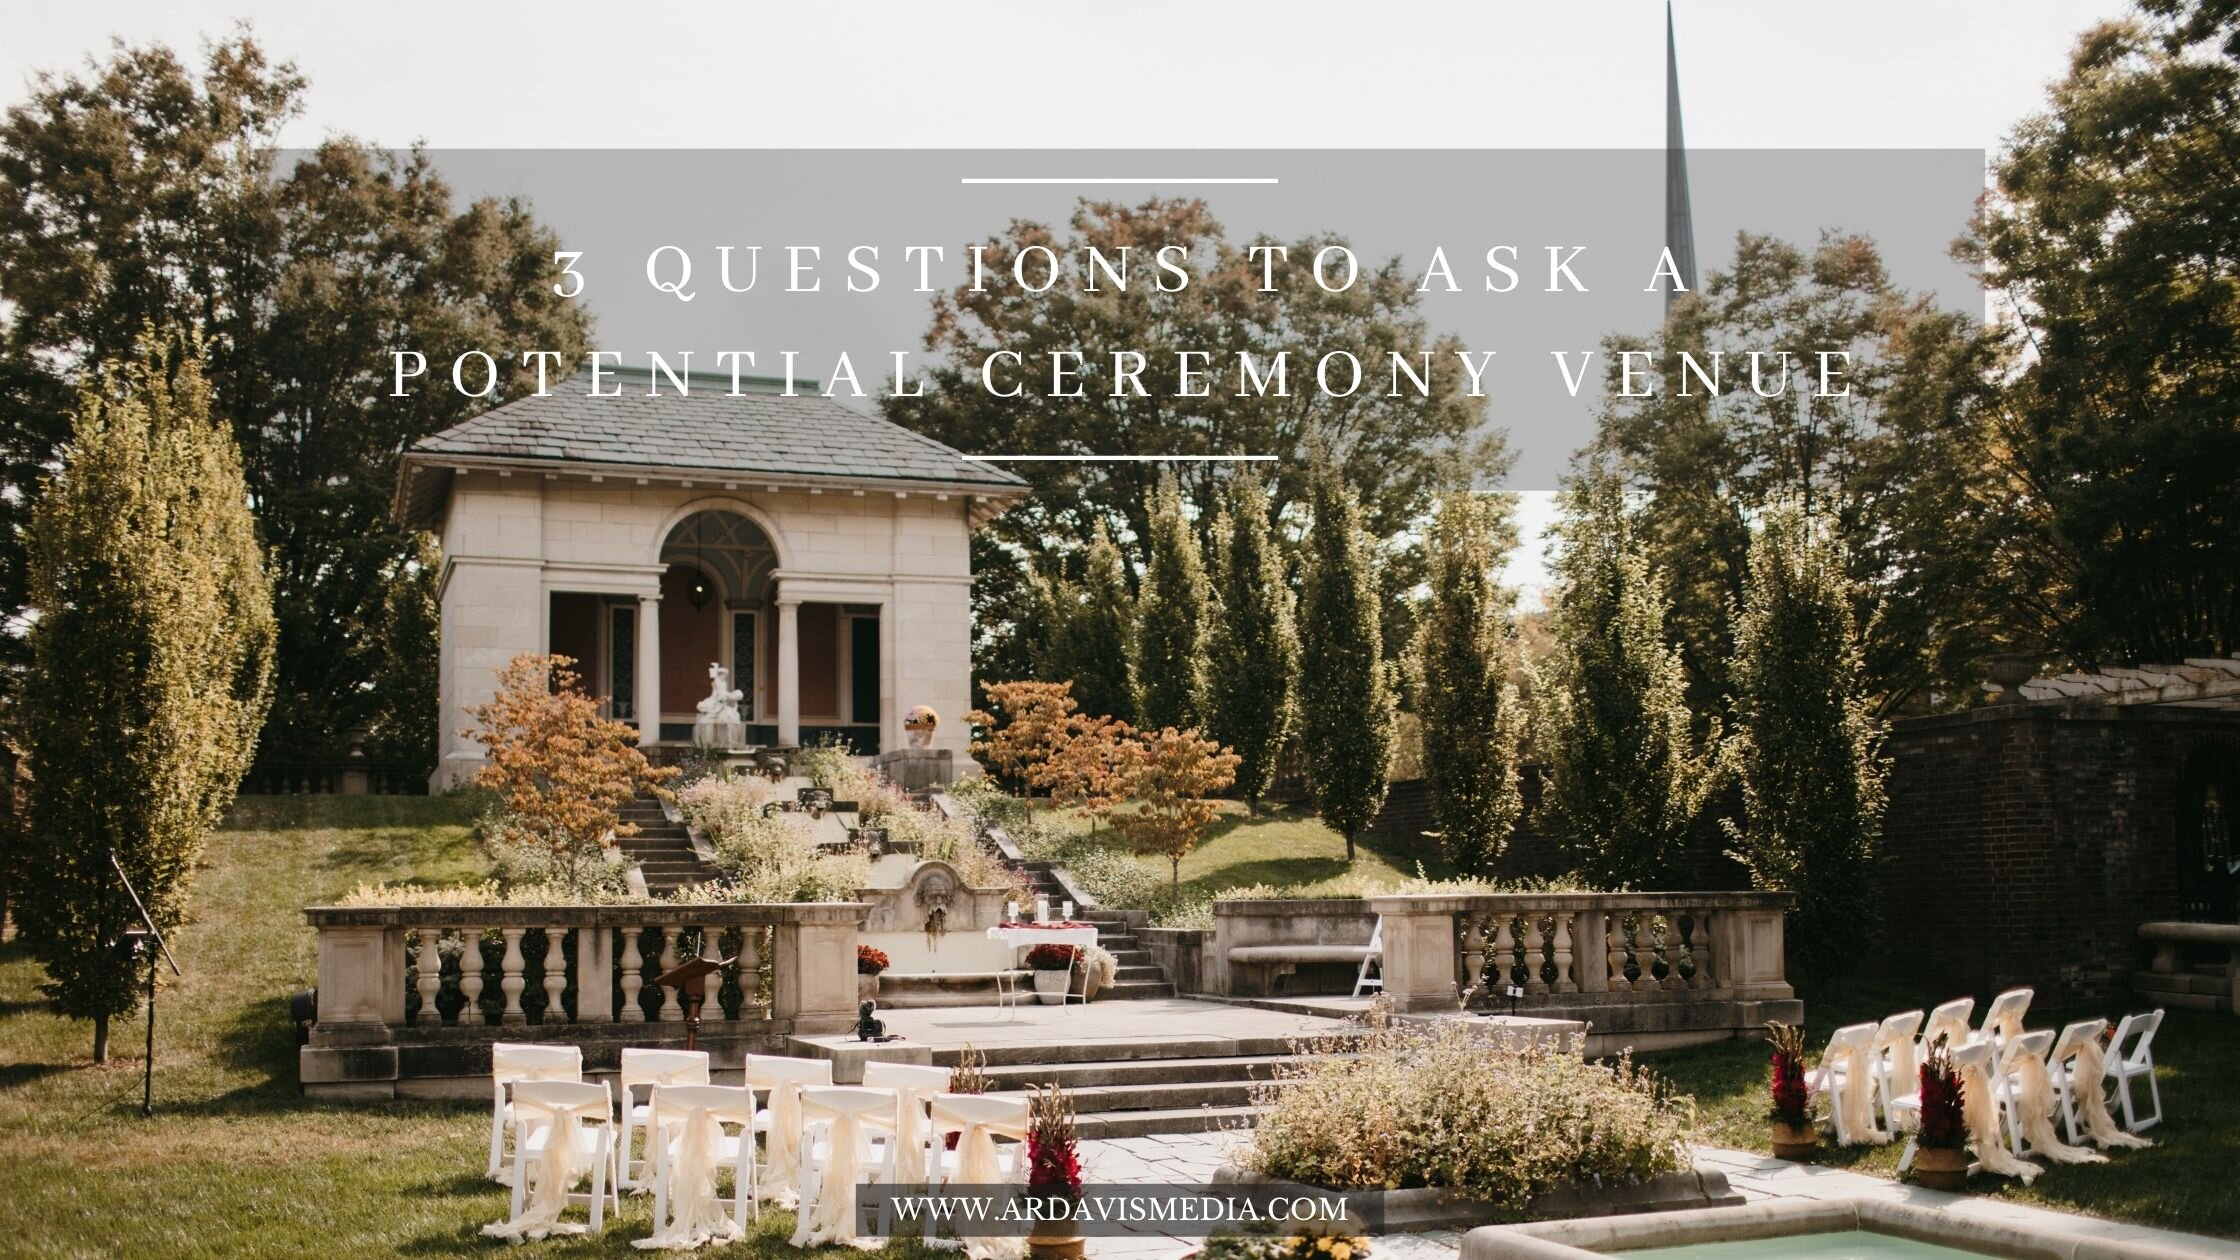 3 questions for a ceremony venue (1).jpg